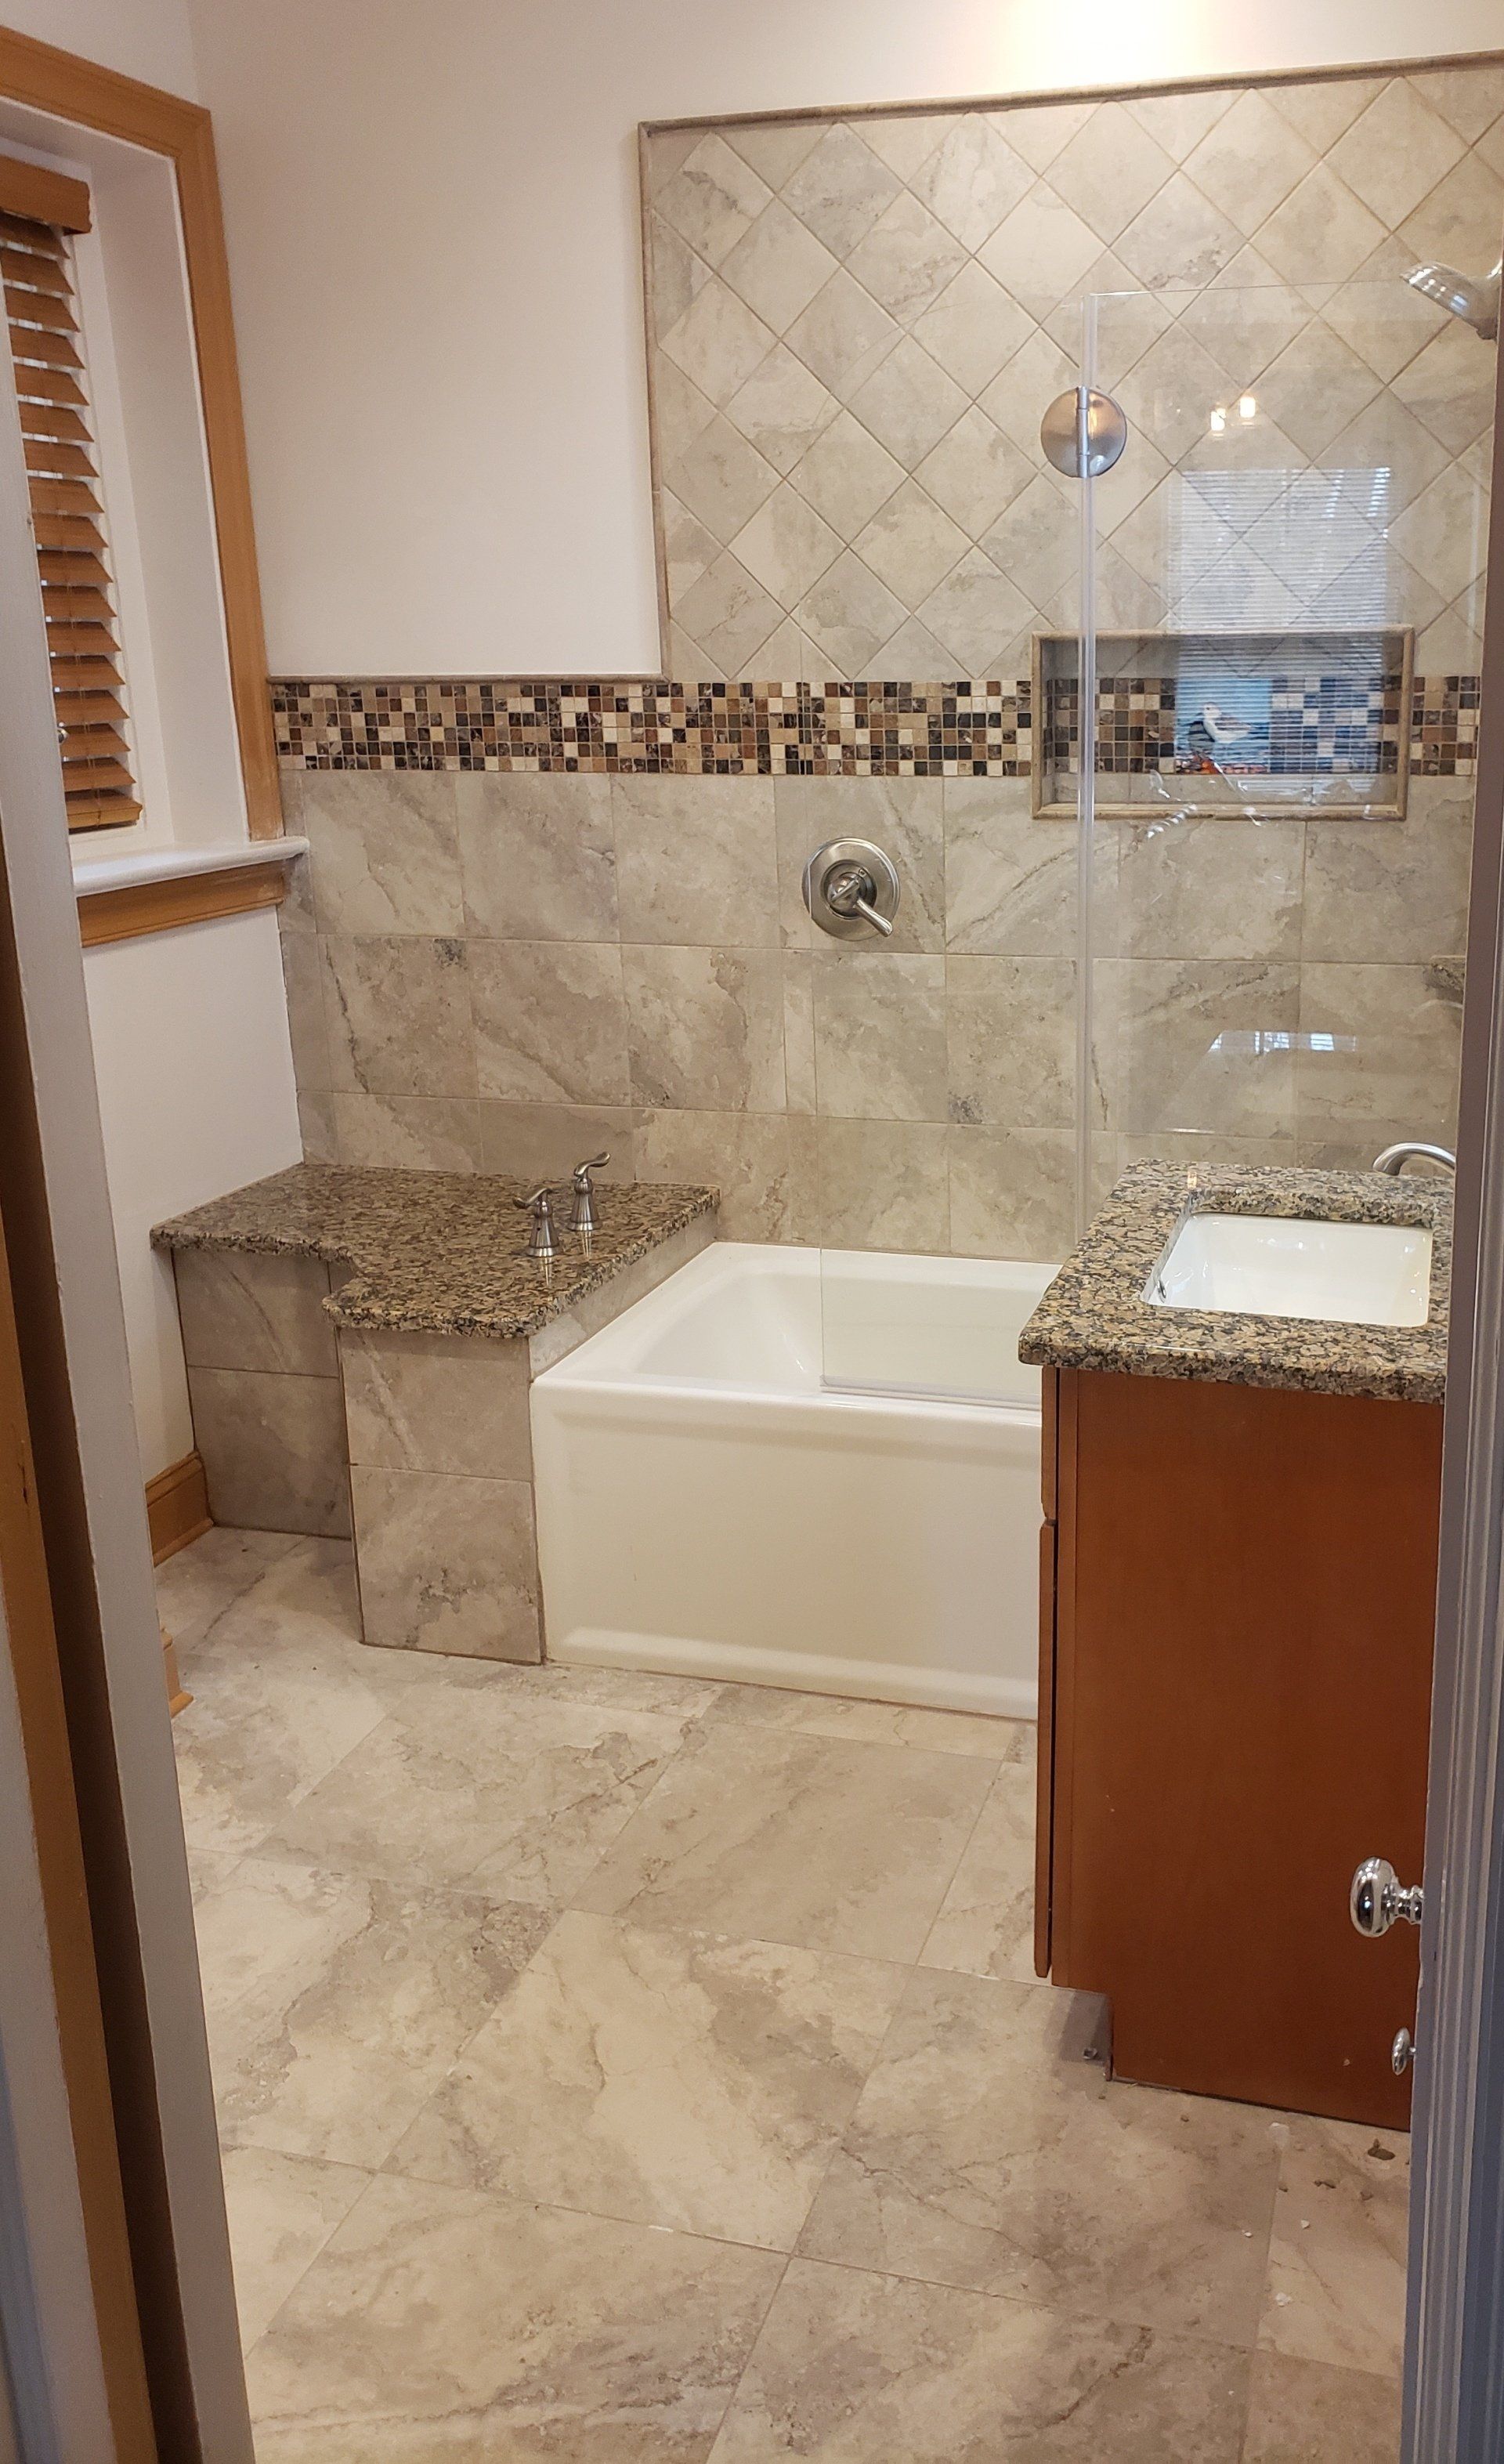 View of tiled wall, tiled floor, sink, custom bench, granite bench top and sink countertop, mosaic tile trim, pocket shelf in shower and accent painted tile in Cheltenham bathroom remodel.